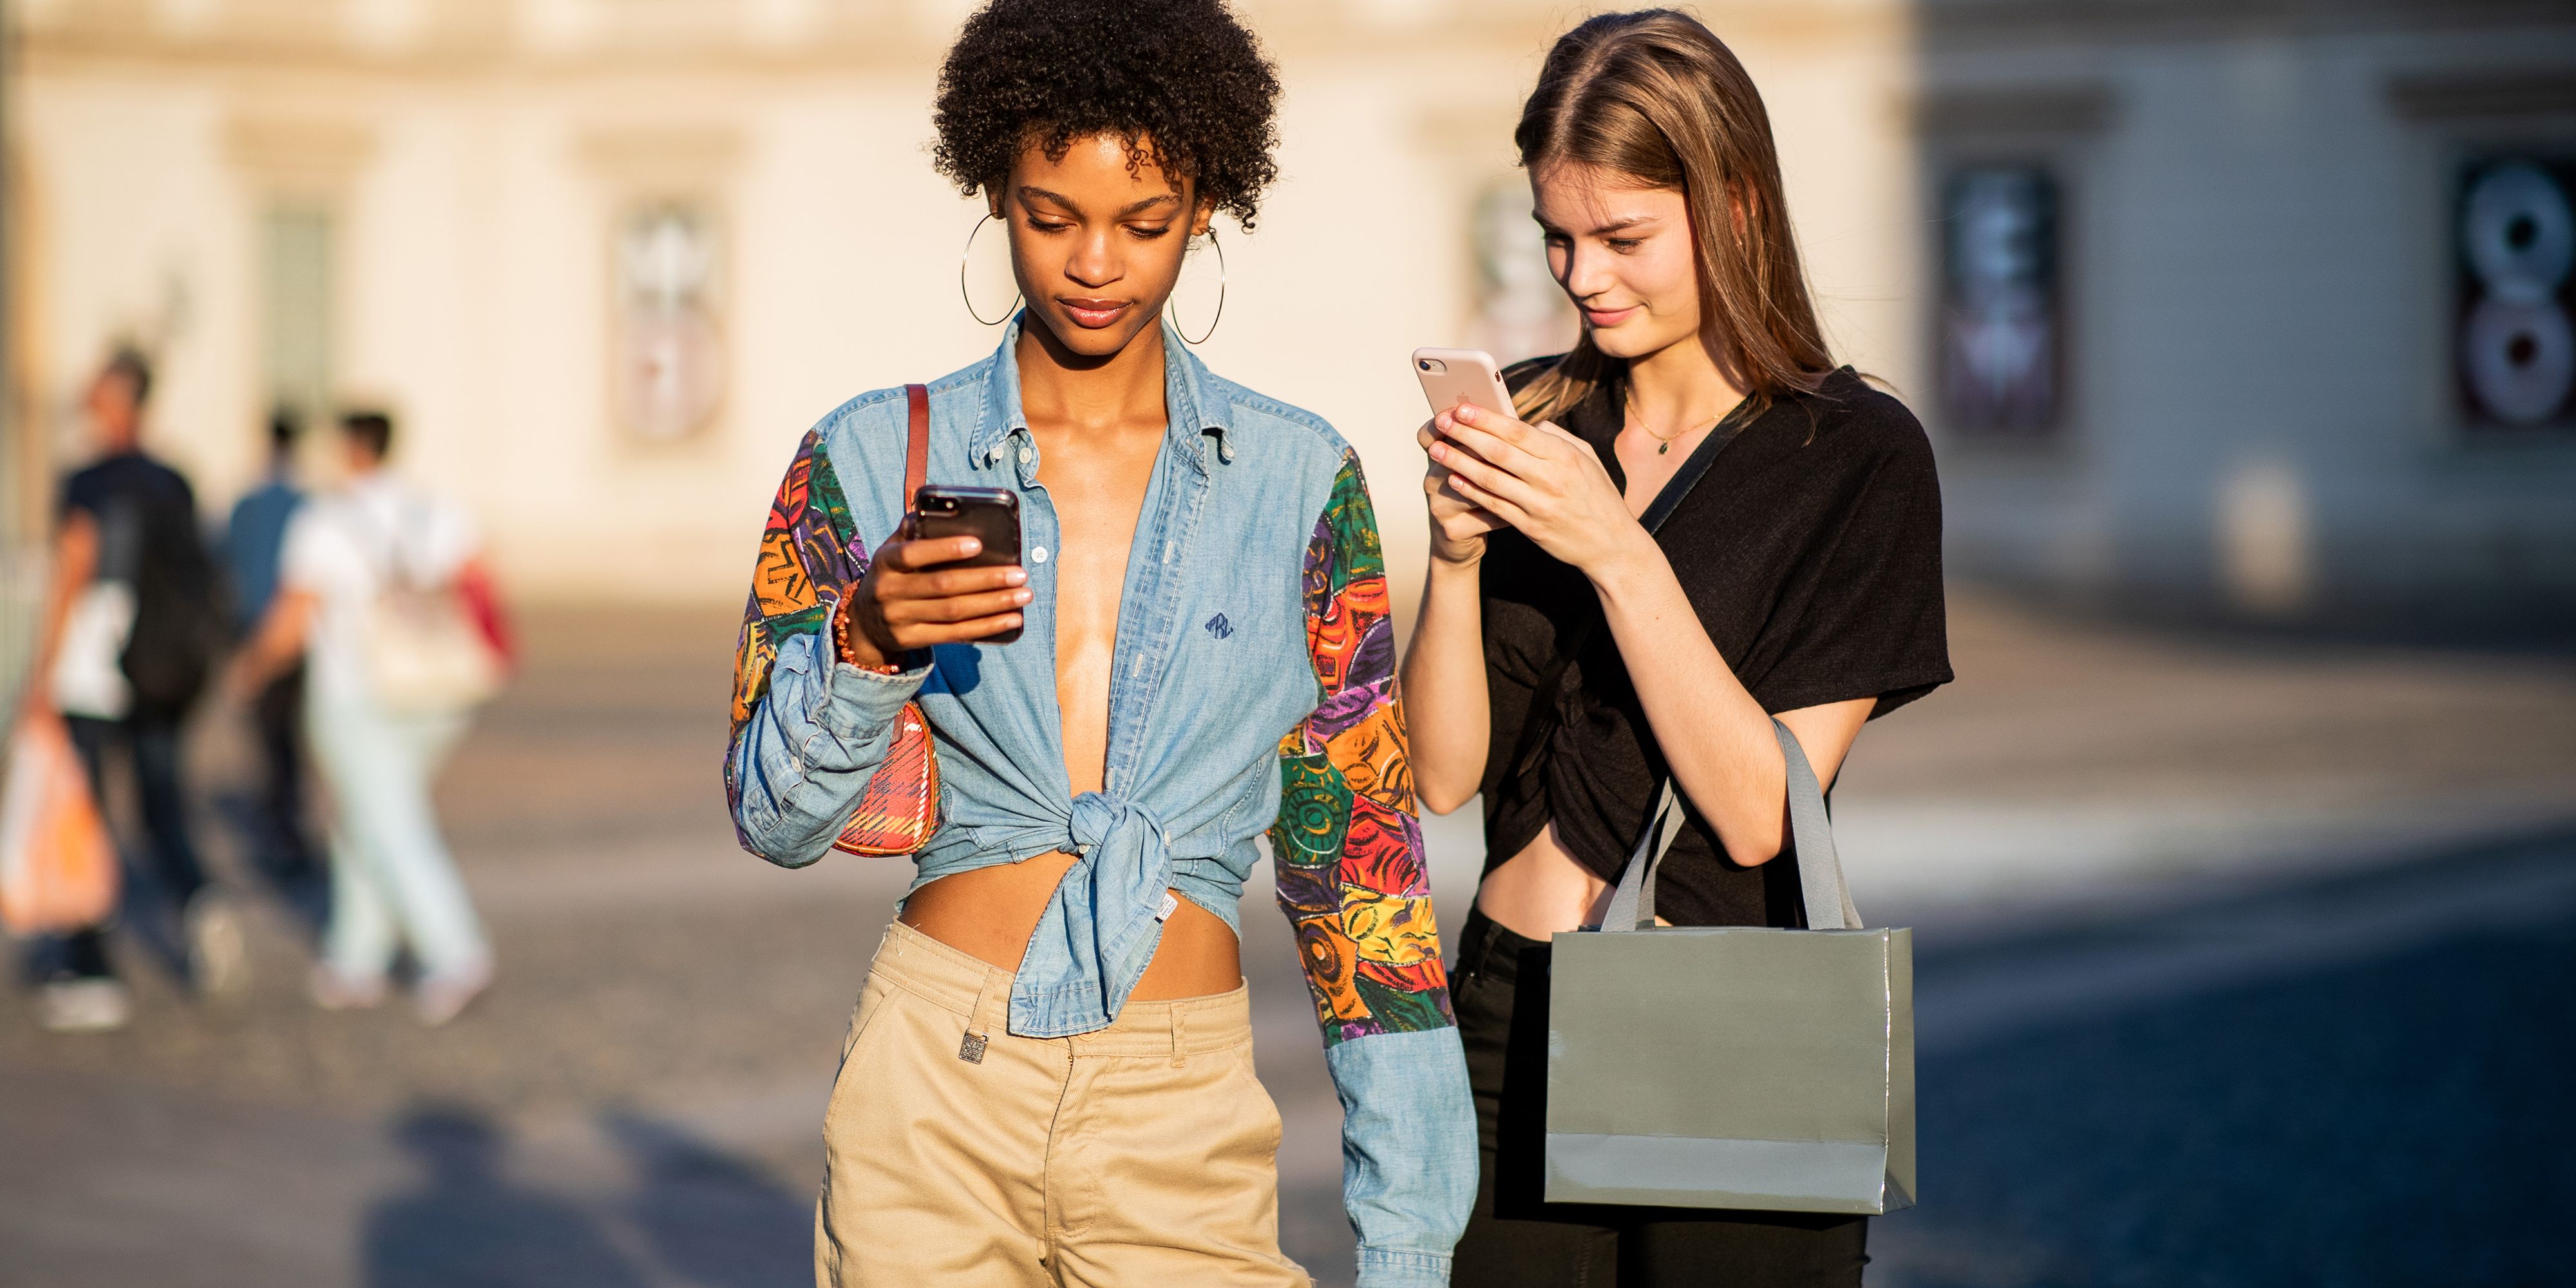 27 Best Shopping Apps 21 Top Fashion And Home Apps